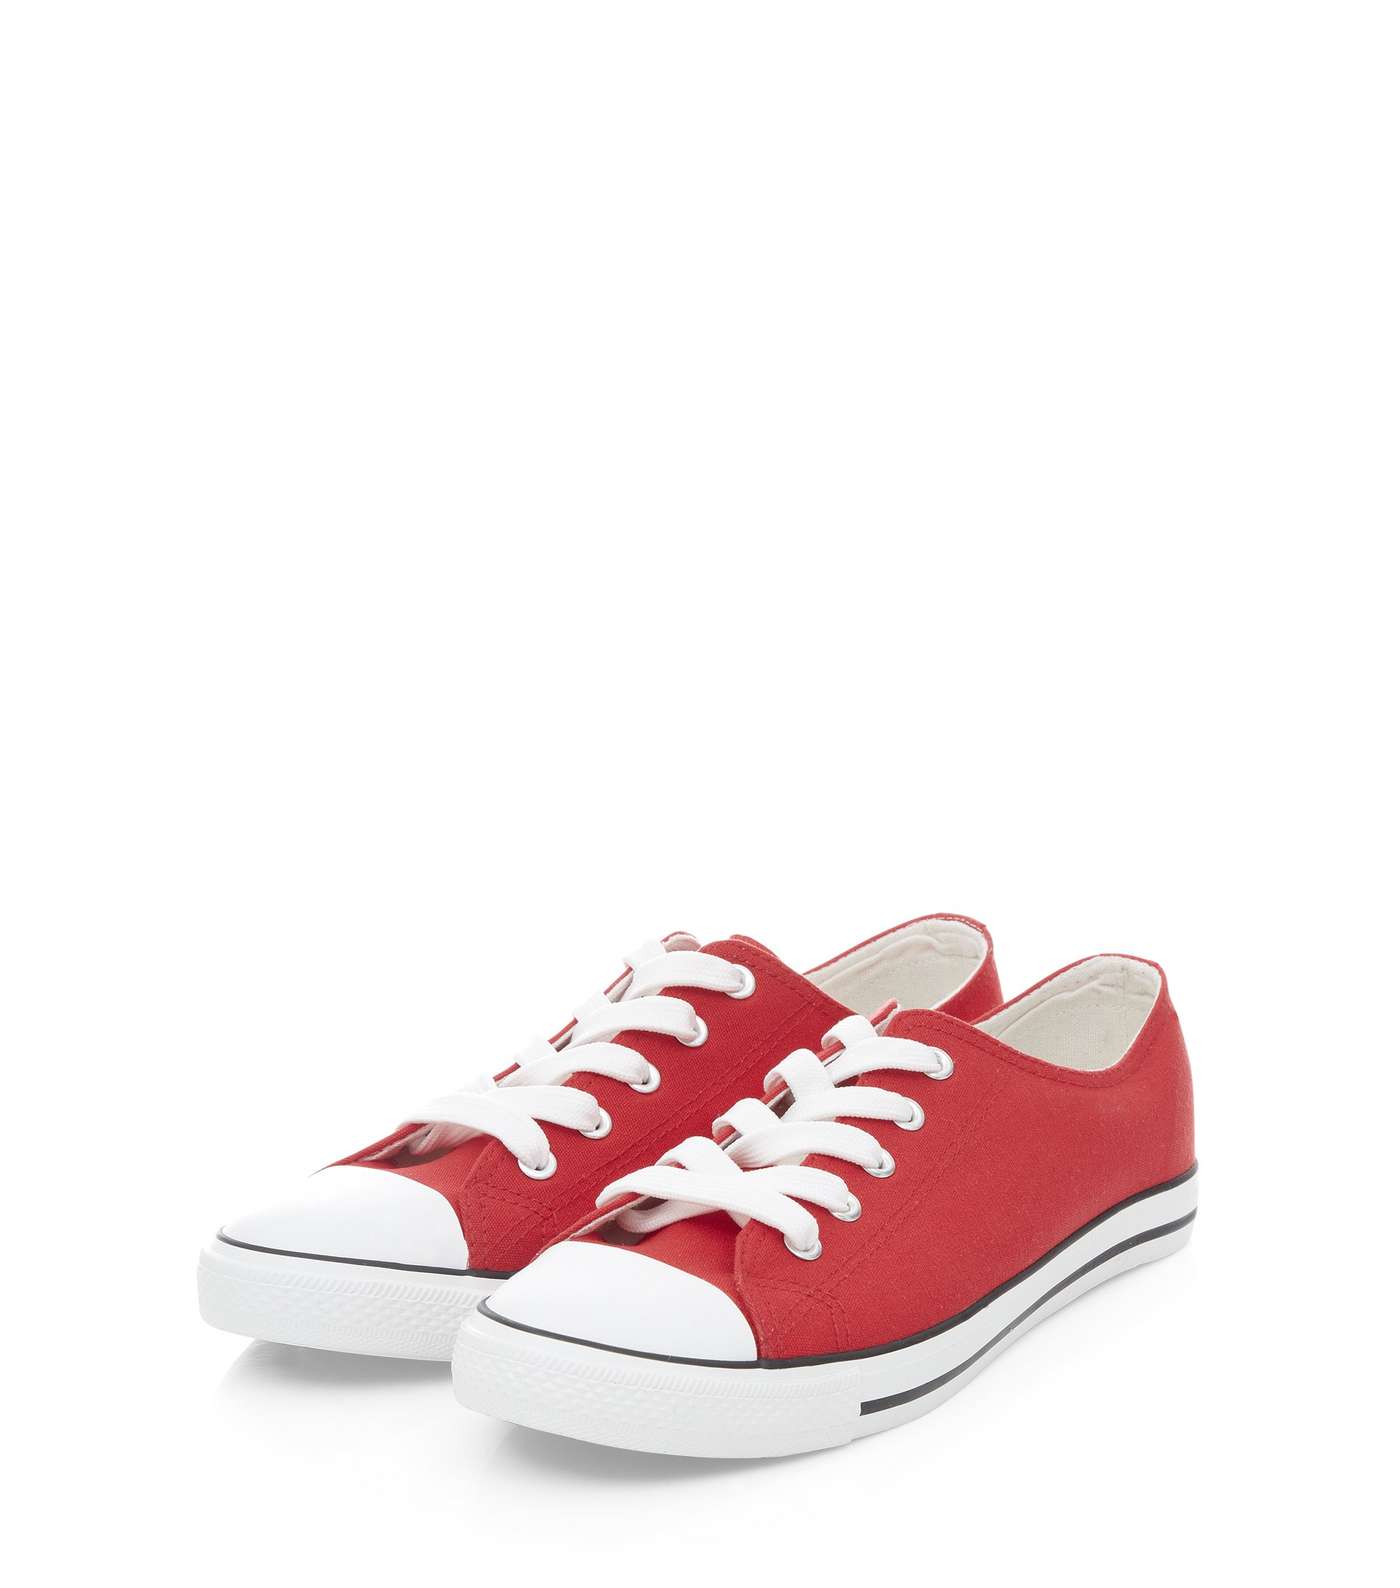 Red Lace Up Striped Sole Plimsolls  Image 3